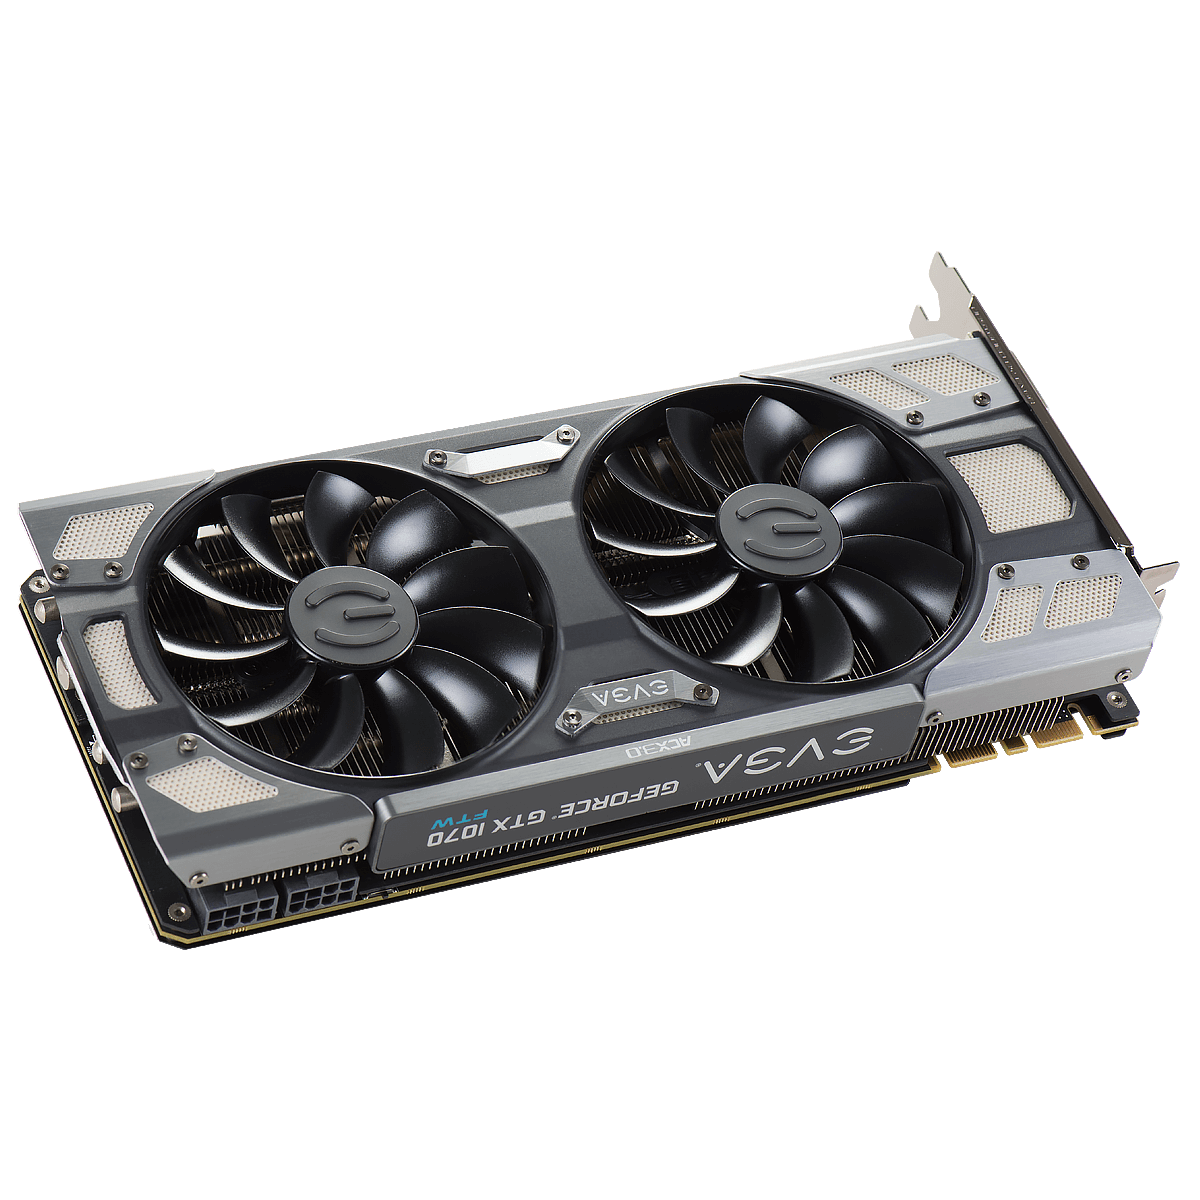 EVGA - Asia - Products - EVGA GeForce GTX 1070 FTW GAMING, 08G-P4 ...